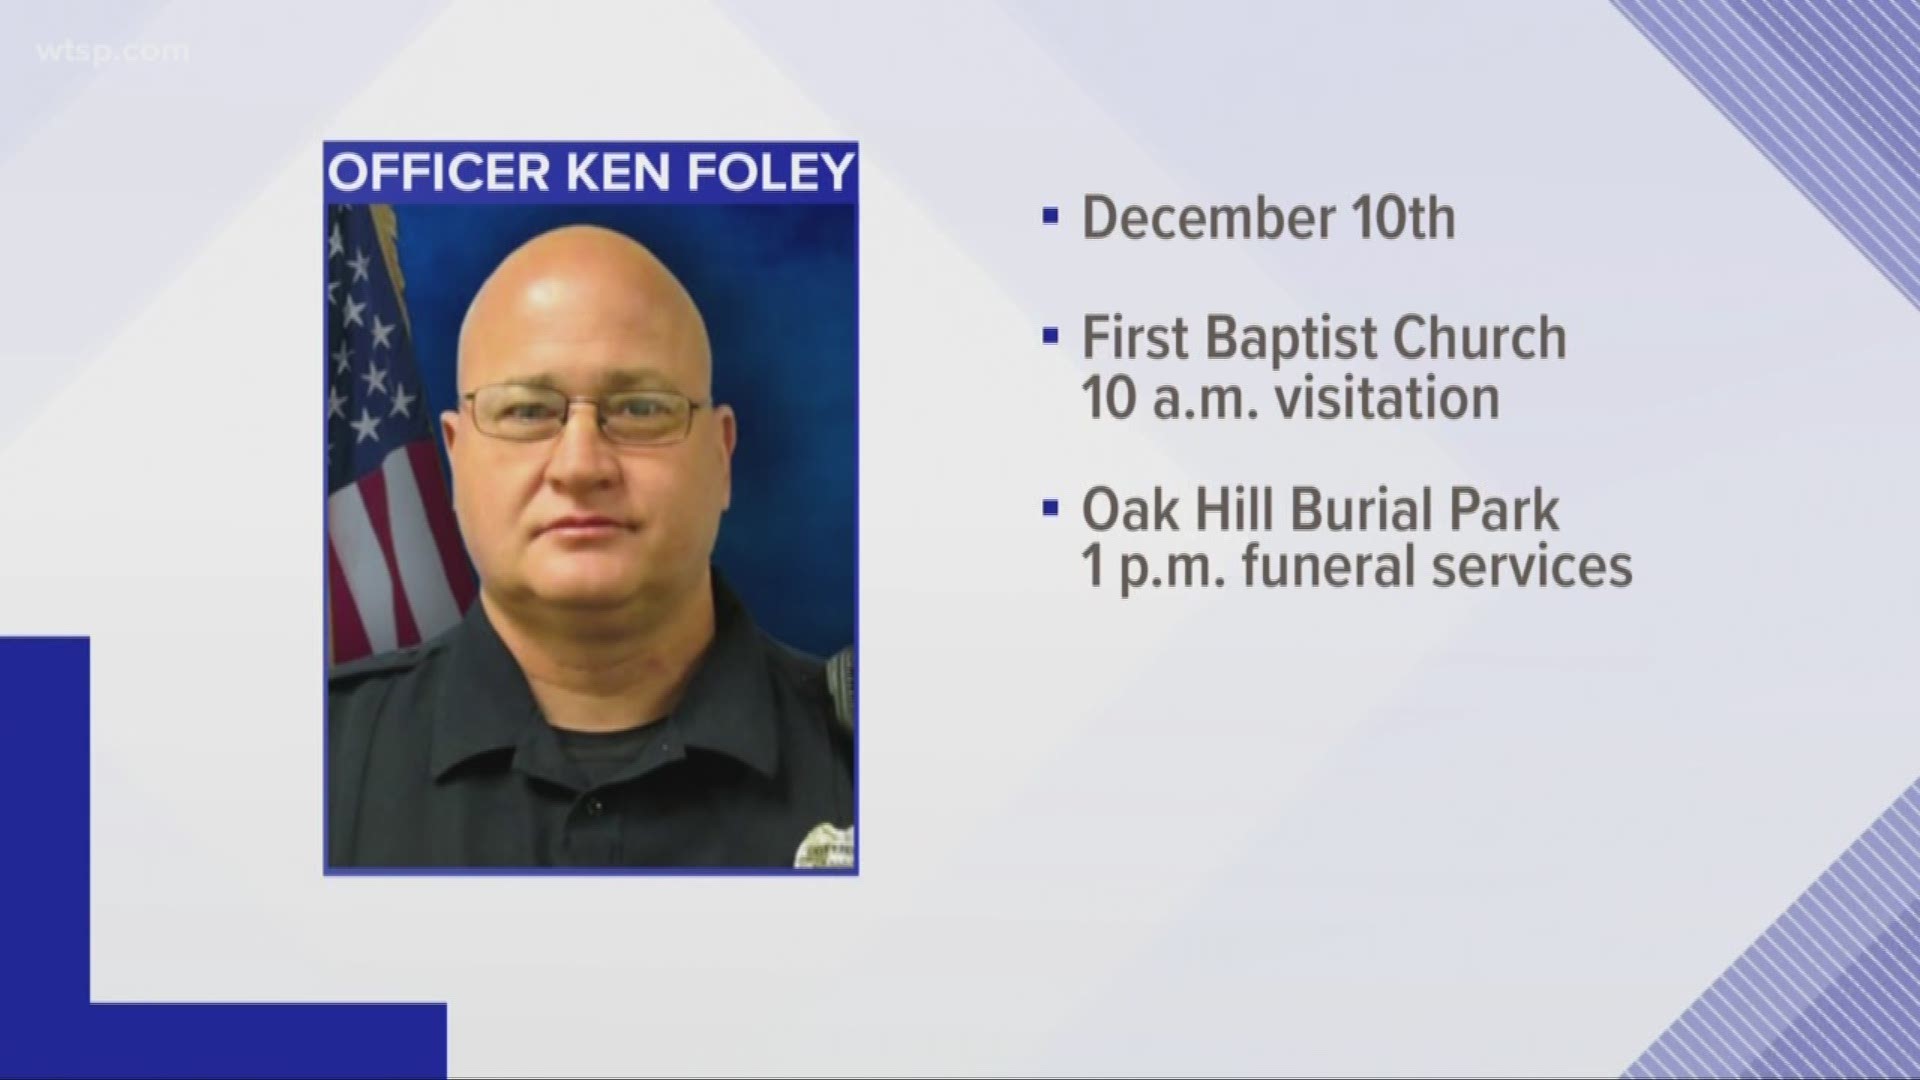 Funeral arrangements have been announced for fallen Lakeland Police Officer Ken Foley, who died after suffering a medical episode last week in his patrol car.